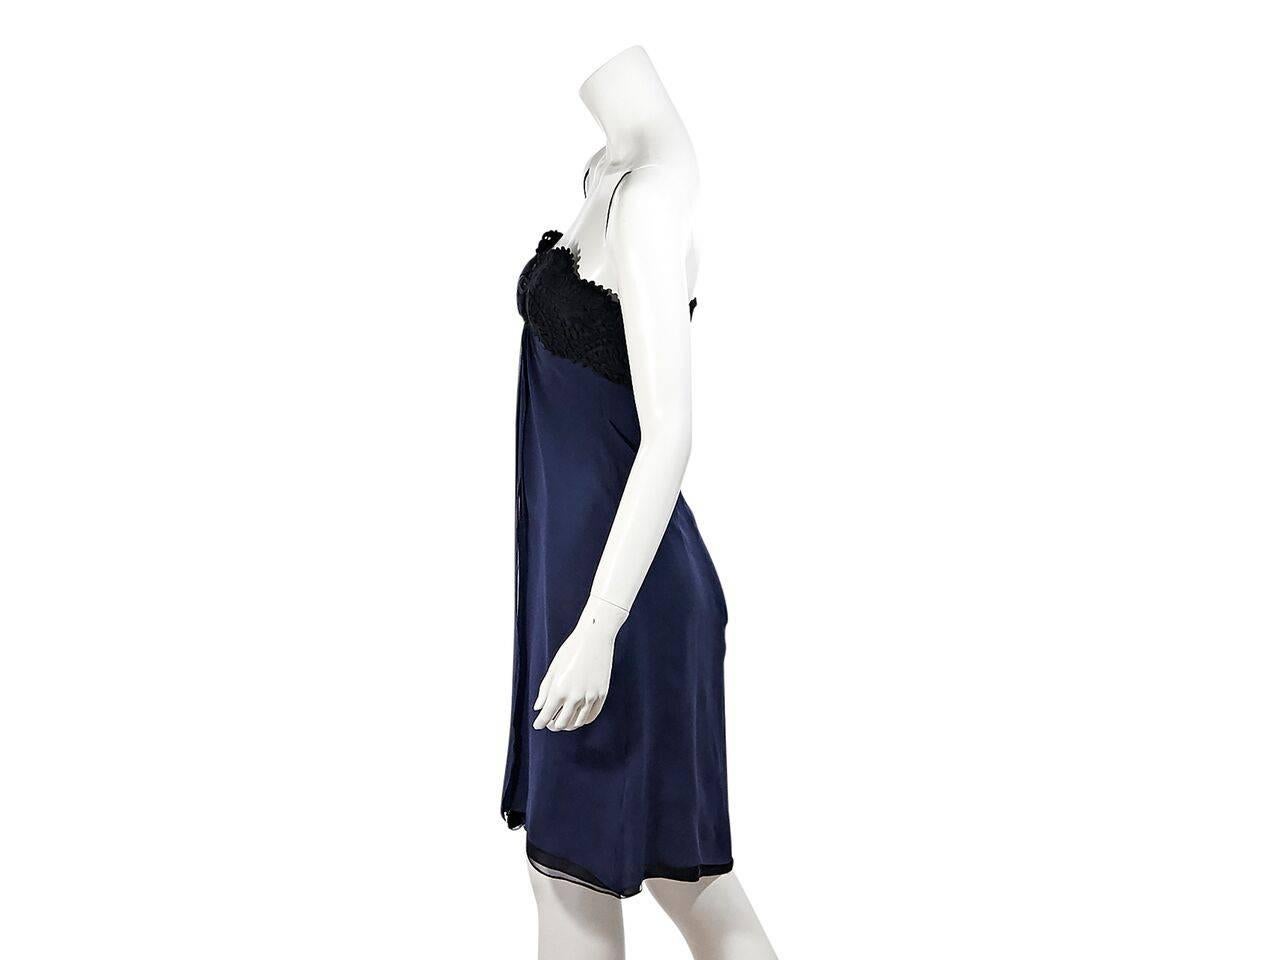 Product details:  Navy blue and black strapless dress by Carolina Herrera.  Sweetheart neckline.  Black lace bodice.  Floral applique at center bust.  Empire waist.  Concealed back zip closure. 
Condition: Pre-owned. Very good.
Est. Retail $ 995.00